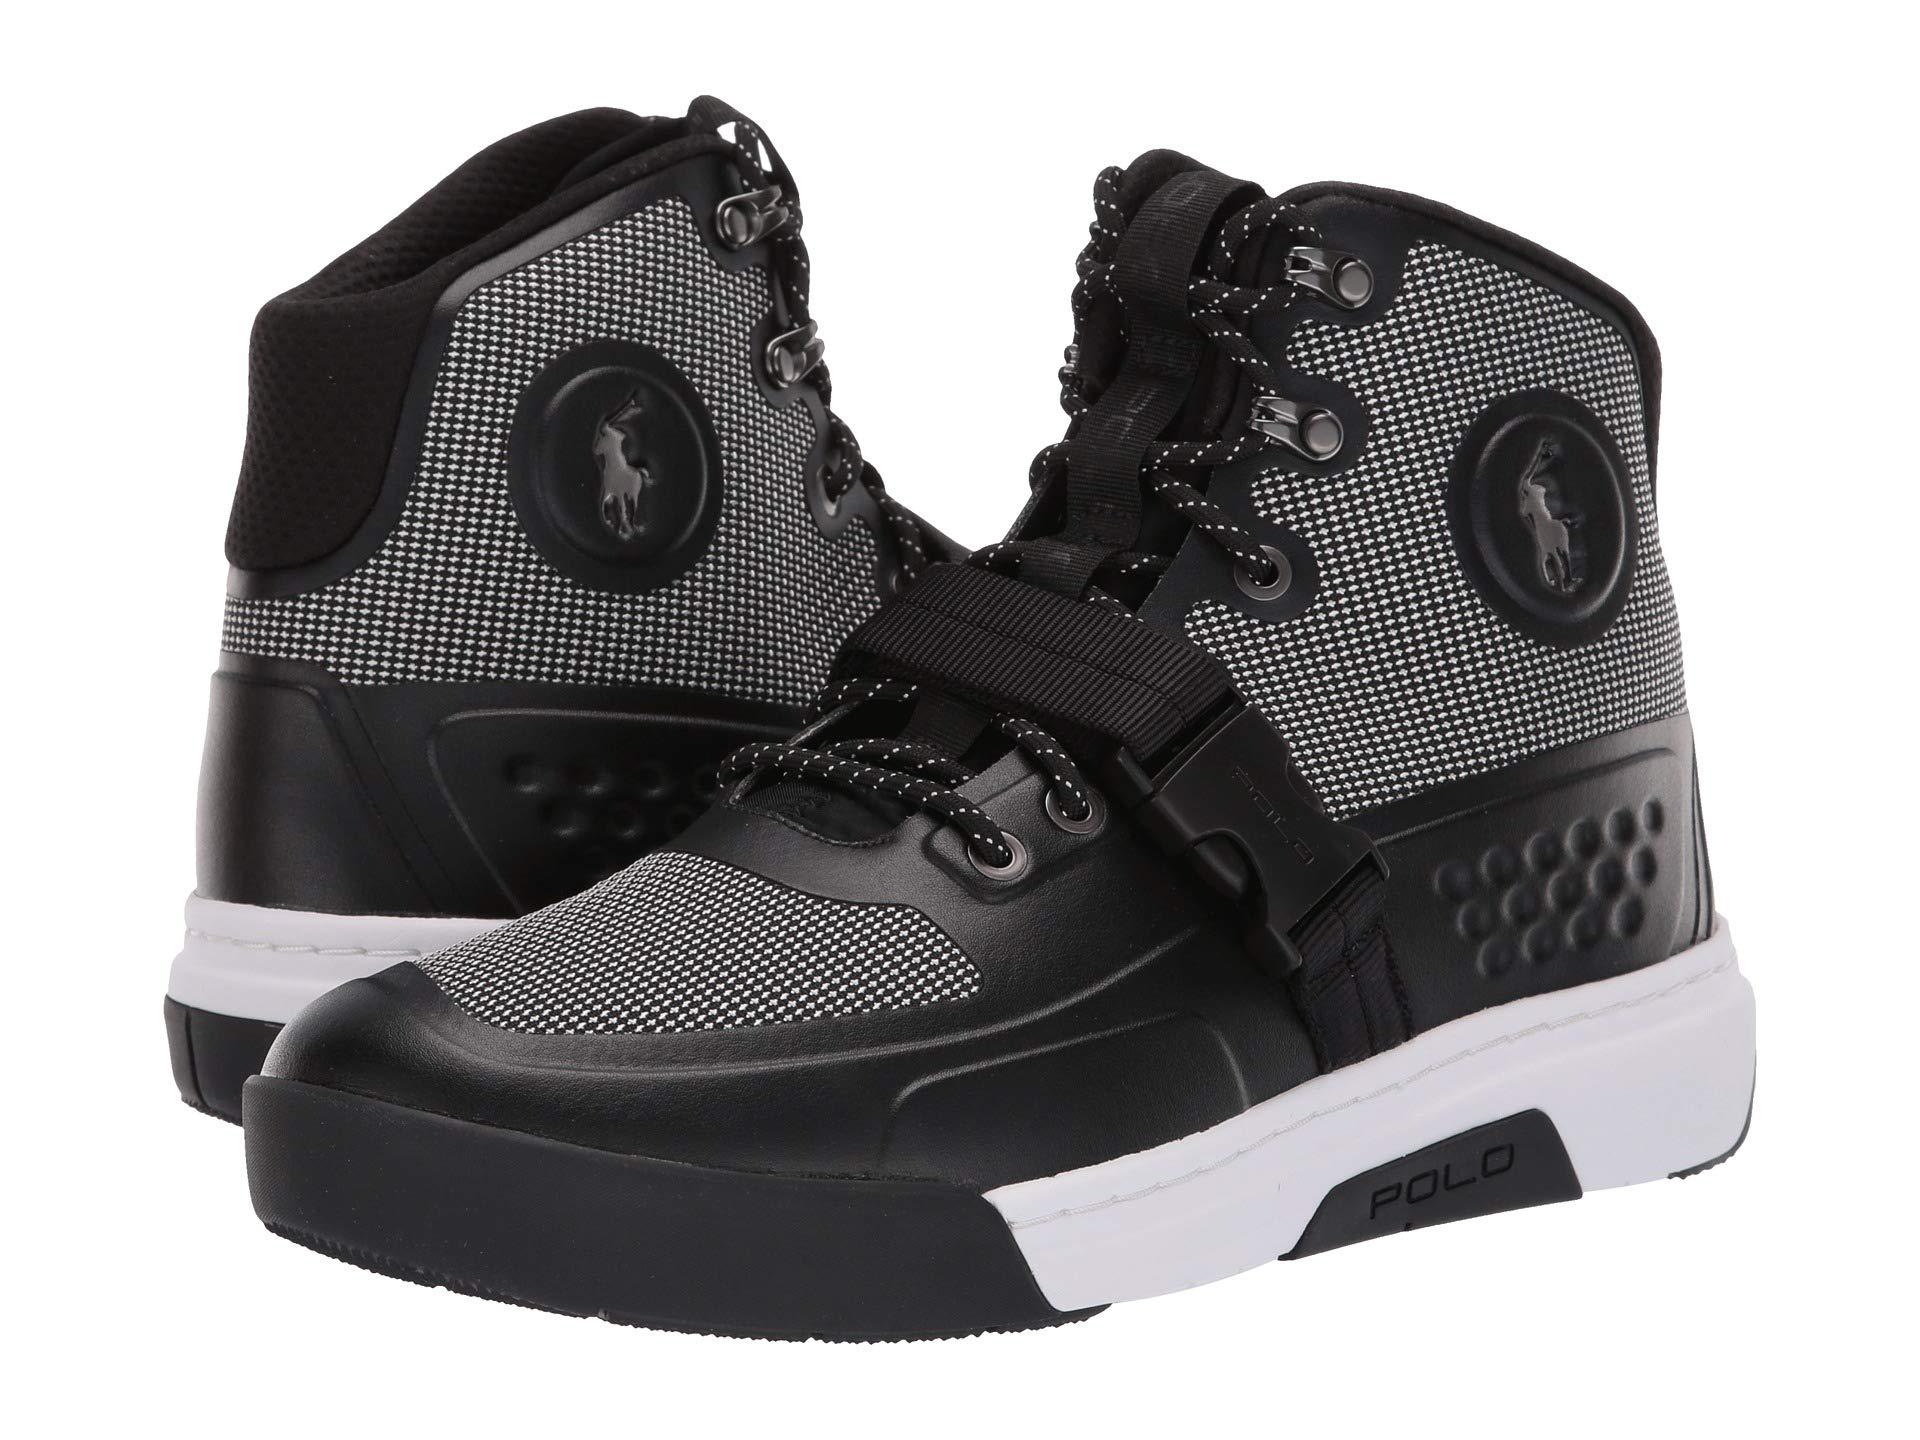 on the other hand, Imminent downpour Polo Ralph Lauren Ranger 200 (black) Shoes for Men | Lyst